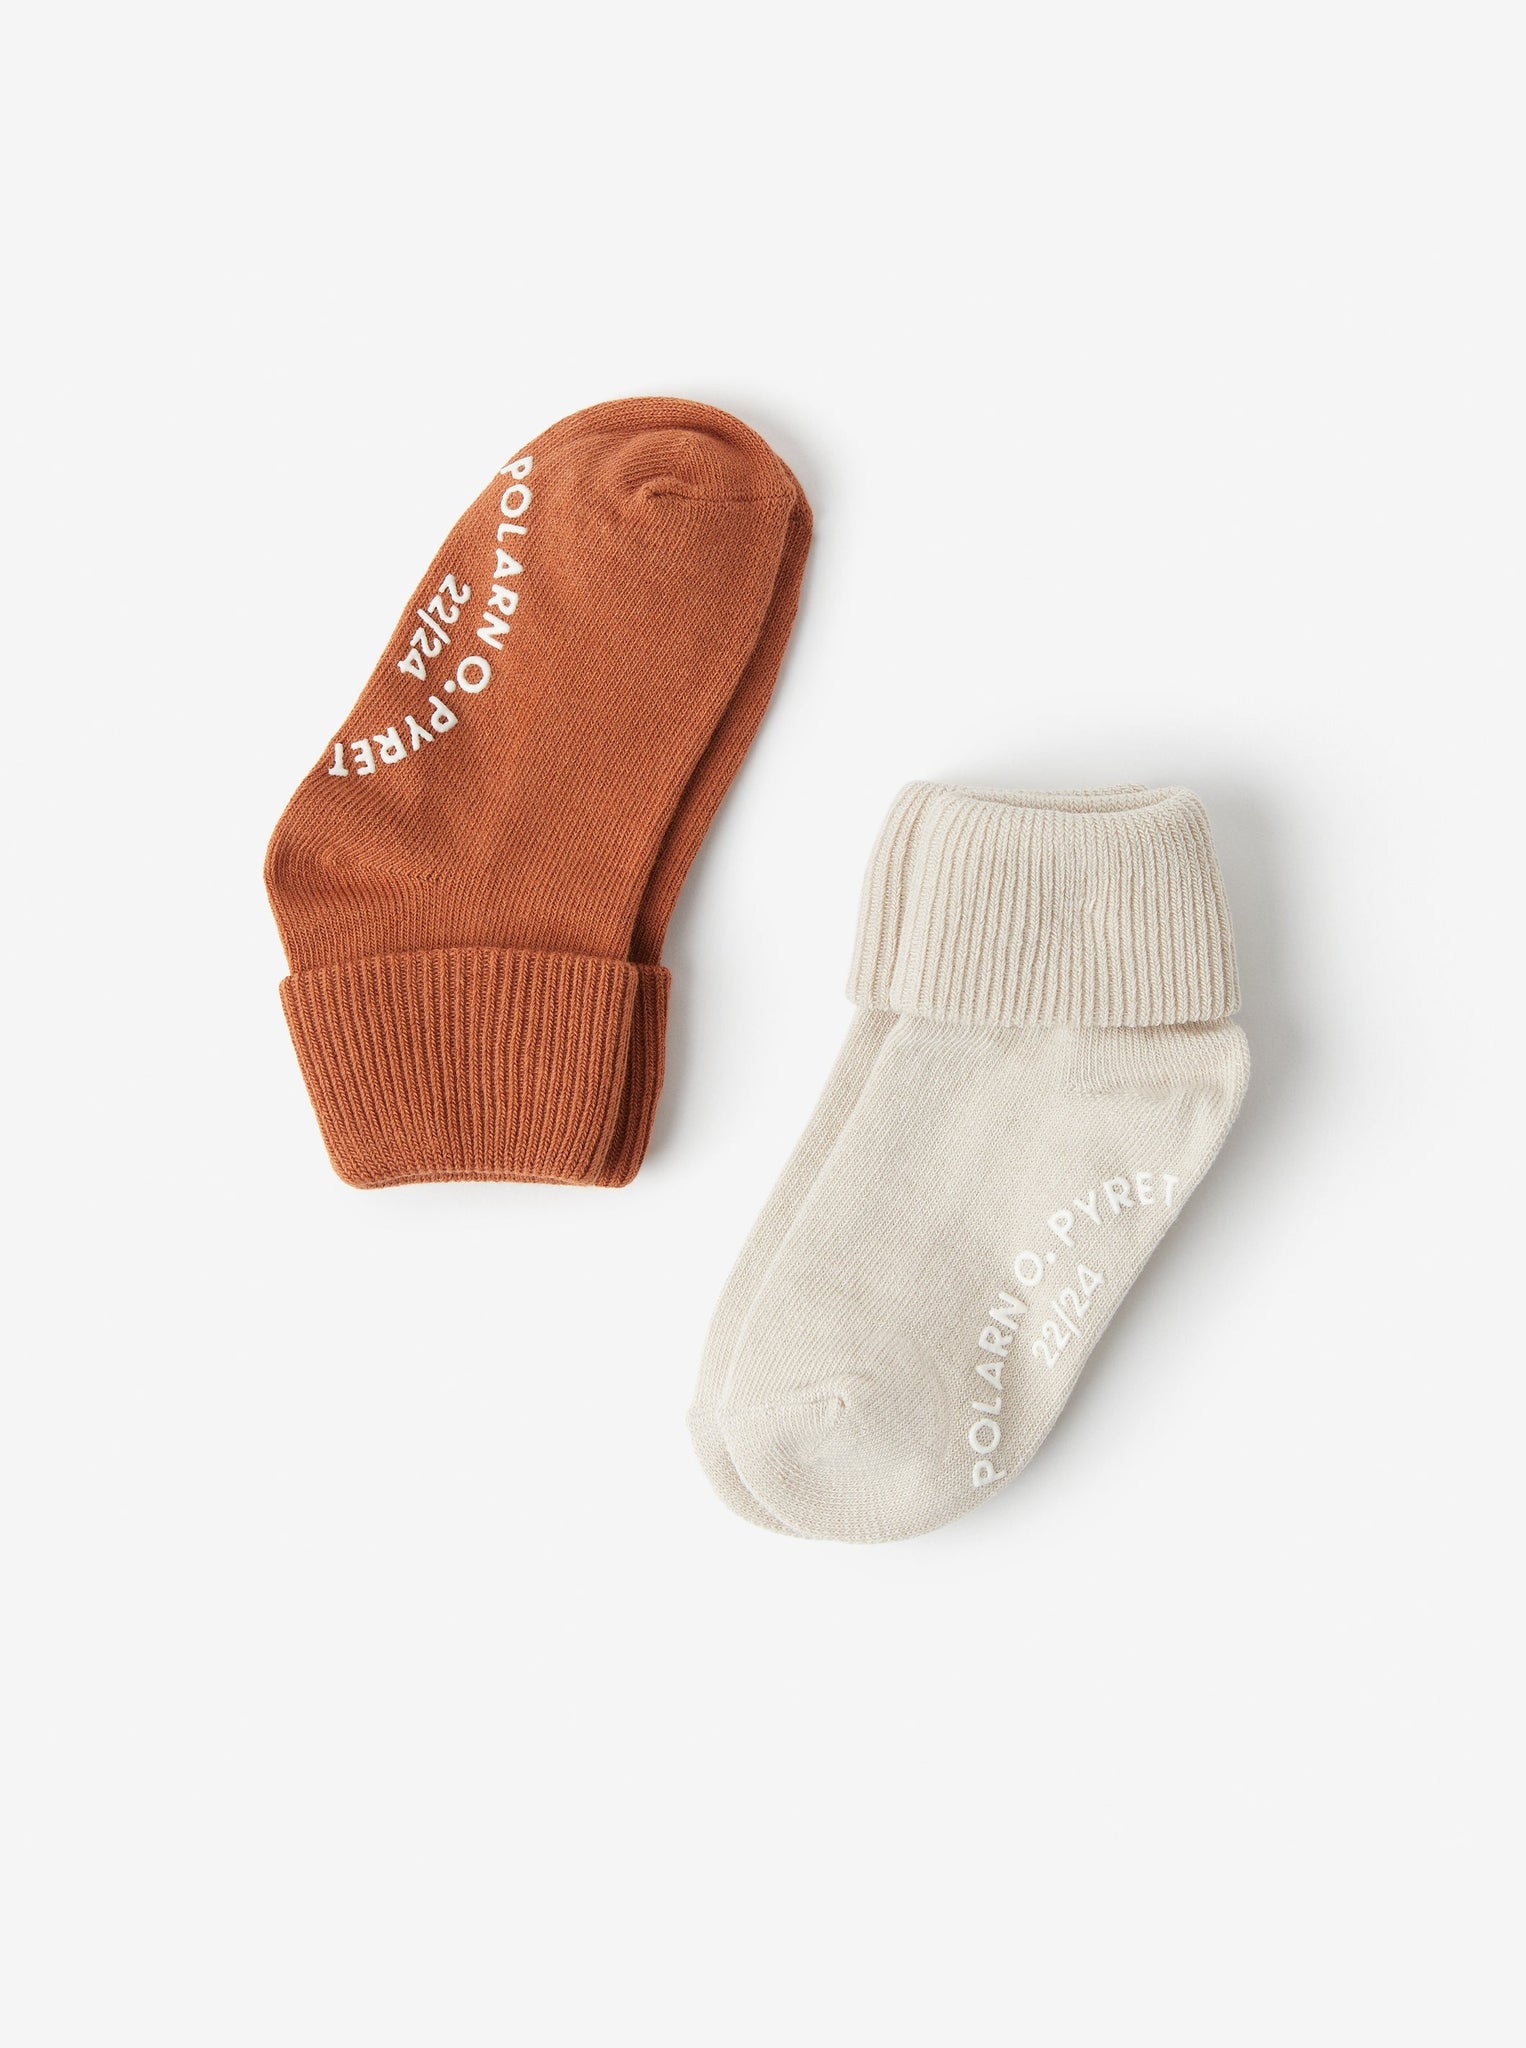 Orange Antislip Kids Socks Multipack from the Polarn O. Pyret kidswear collection. Nordic kids clothes made from sustainable sources.